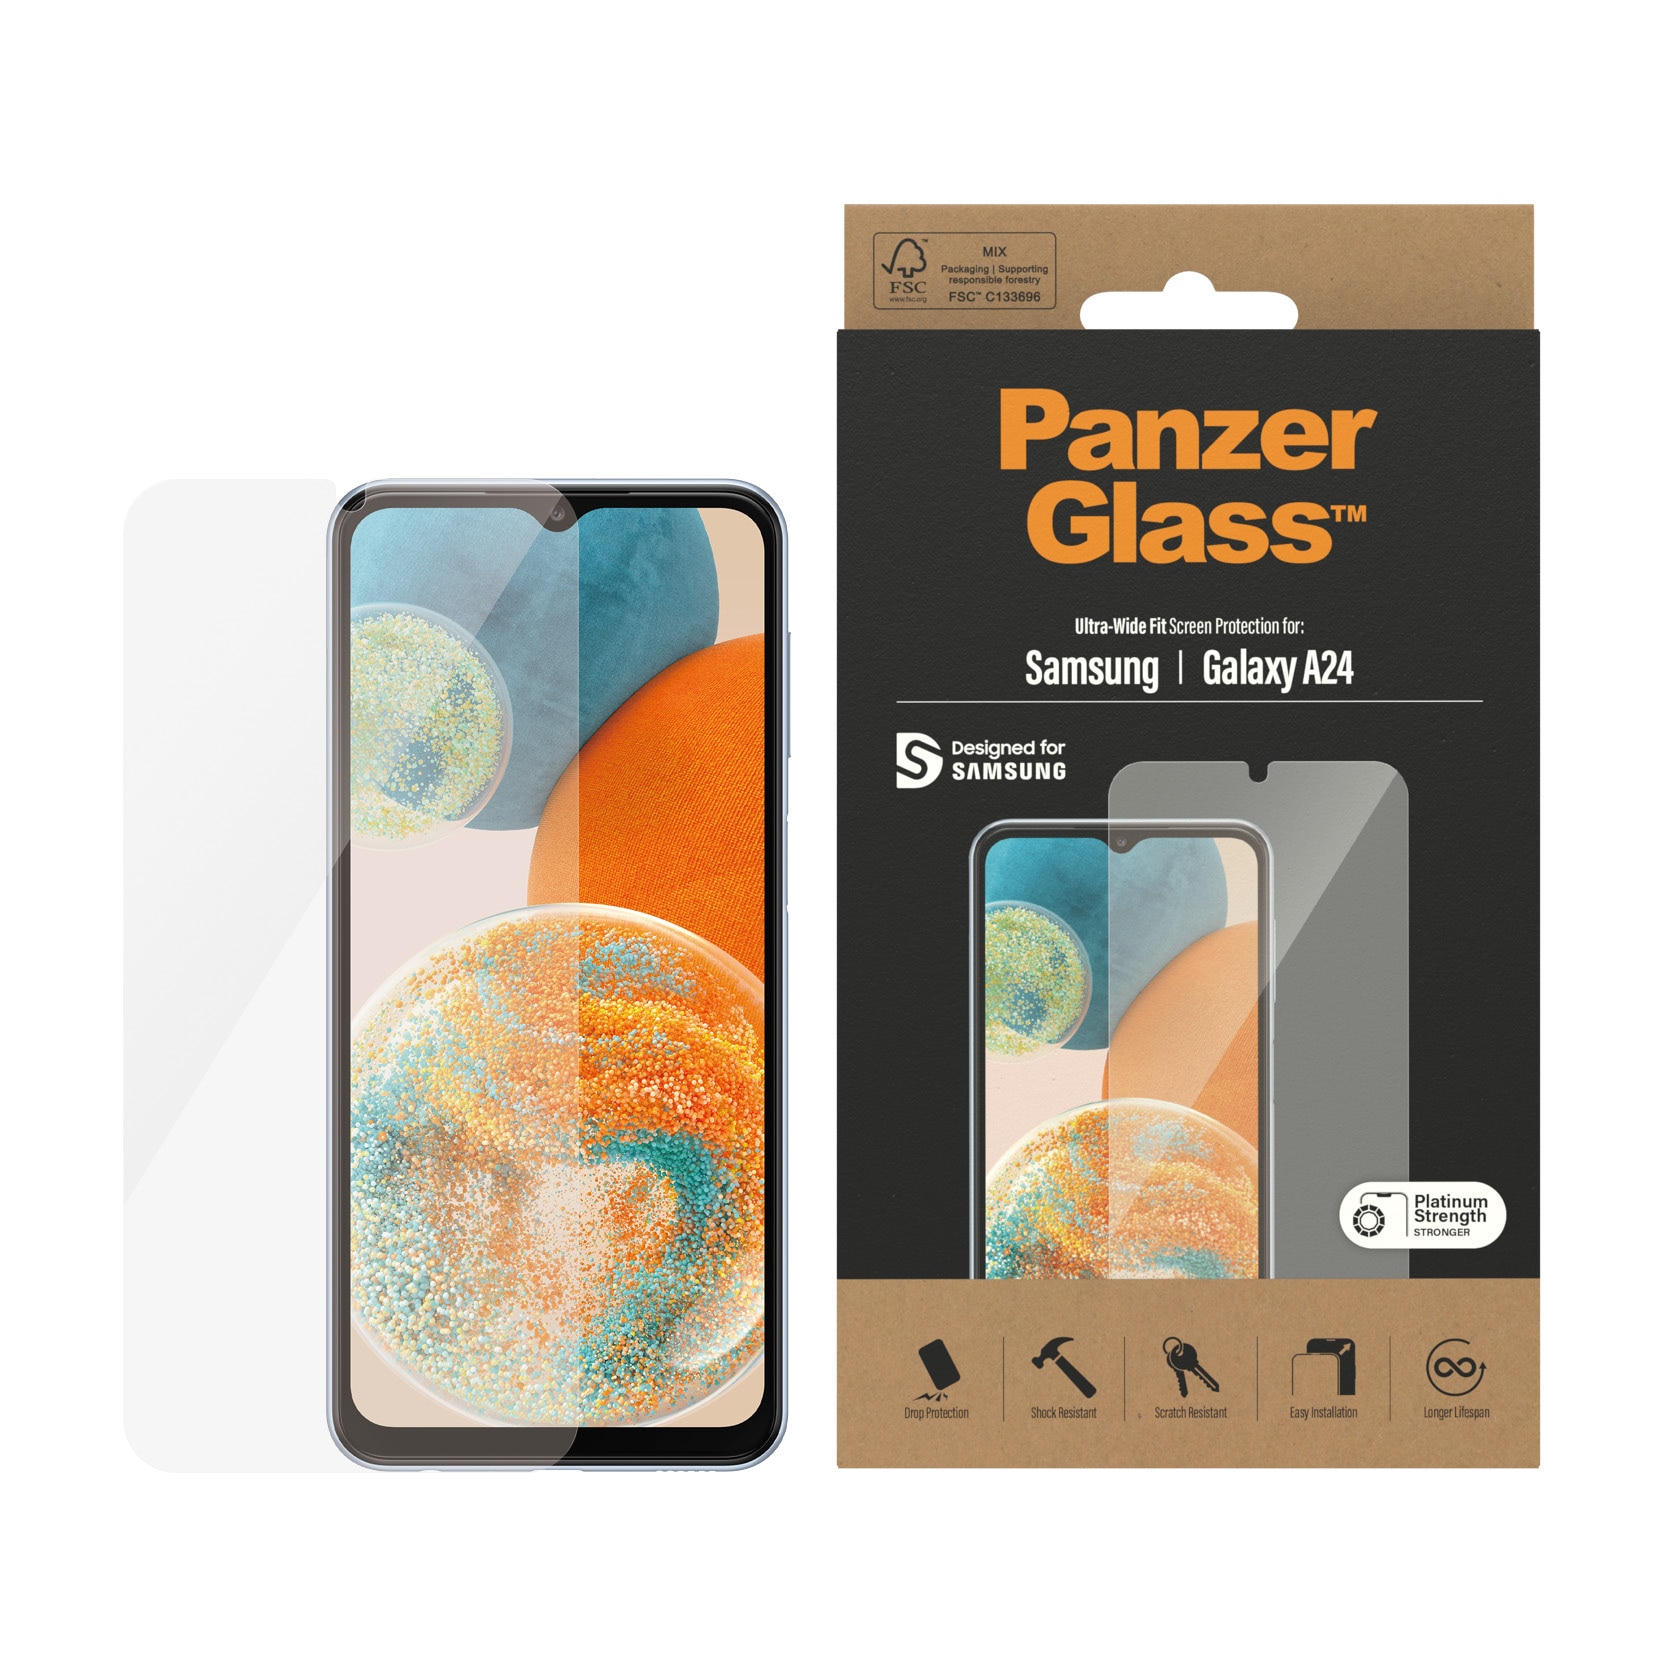 Samsung Galaxy A24 Screen Protector Ultra Wide Fit